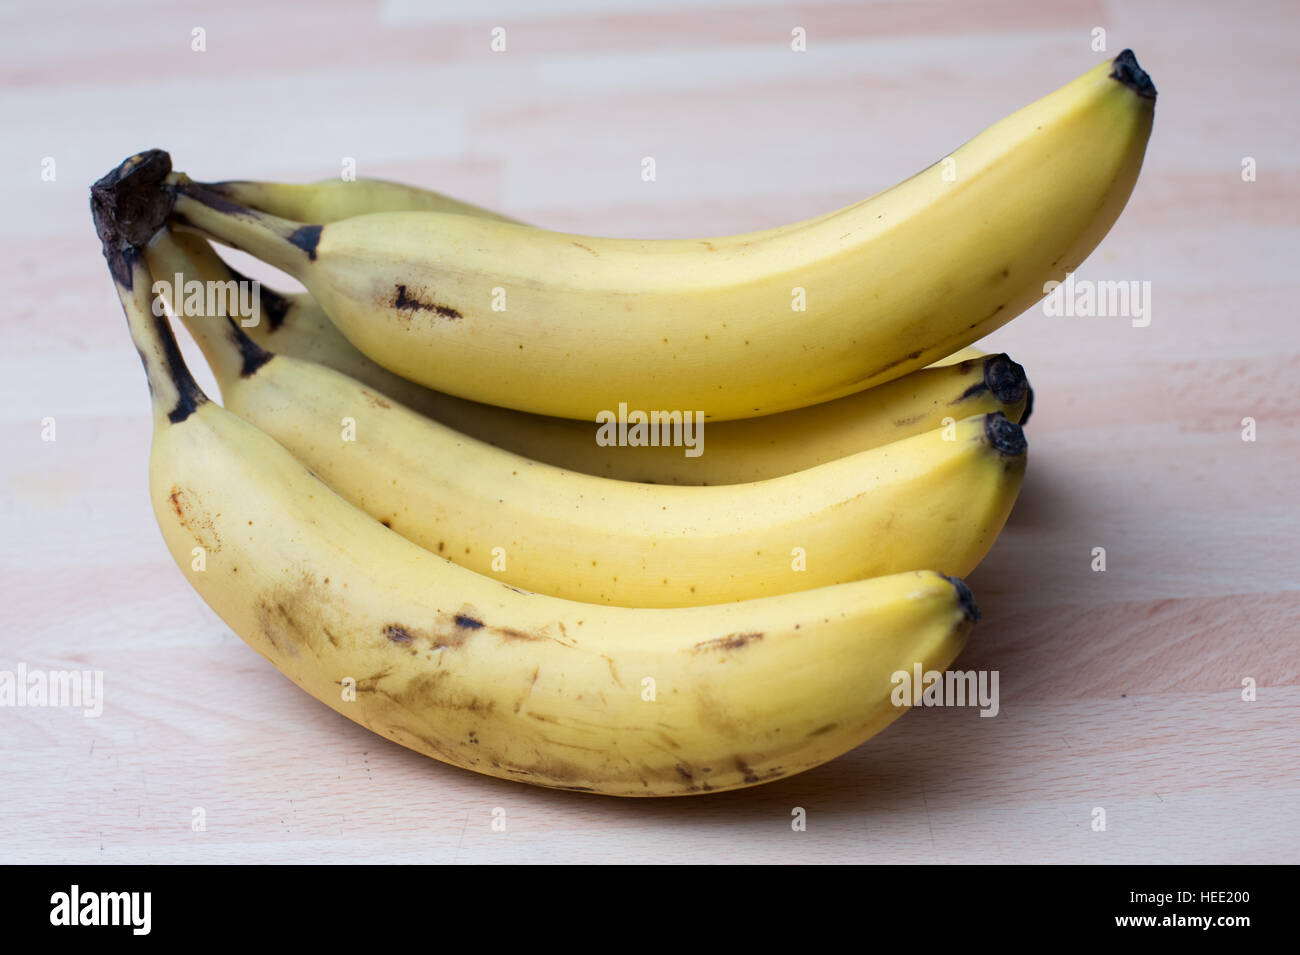 Banana Vector Images (over 85,000)